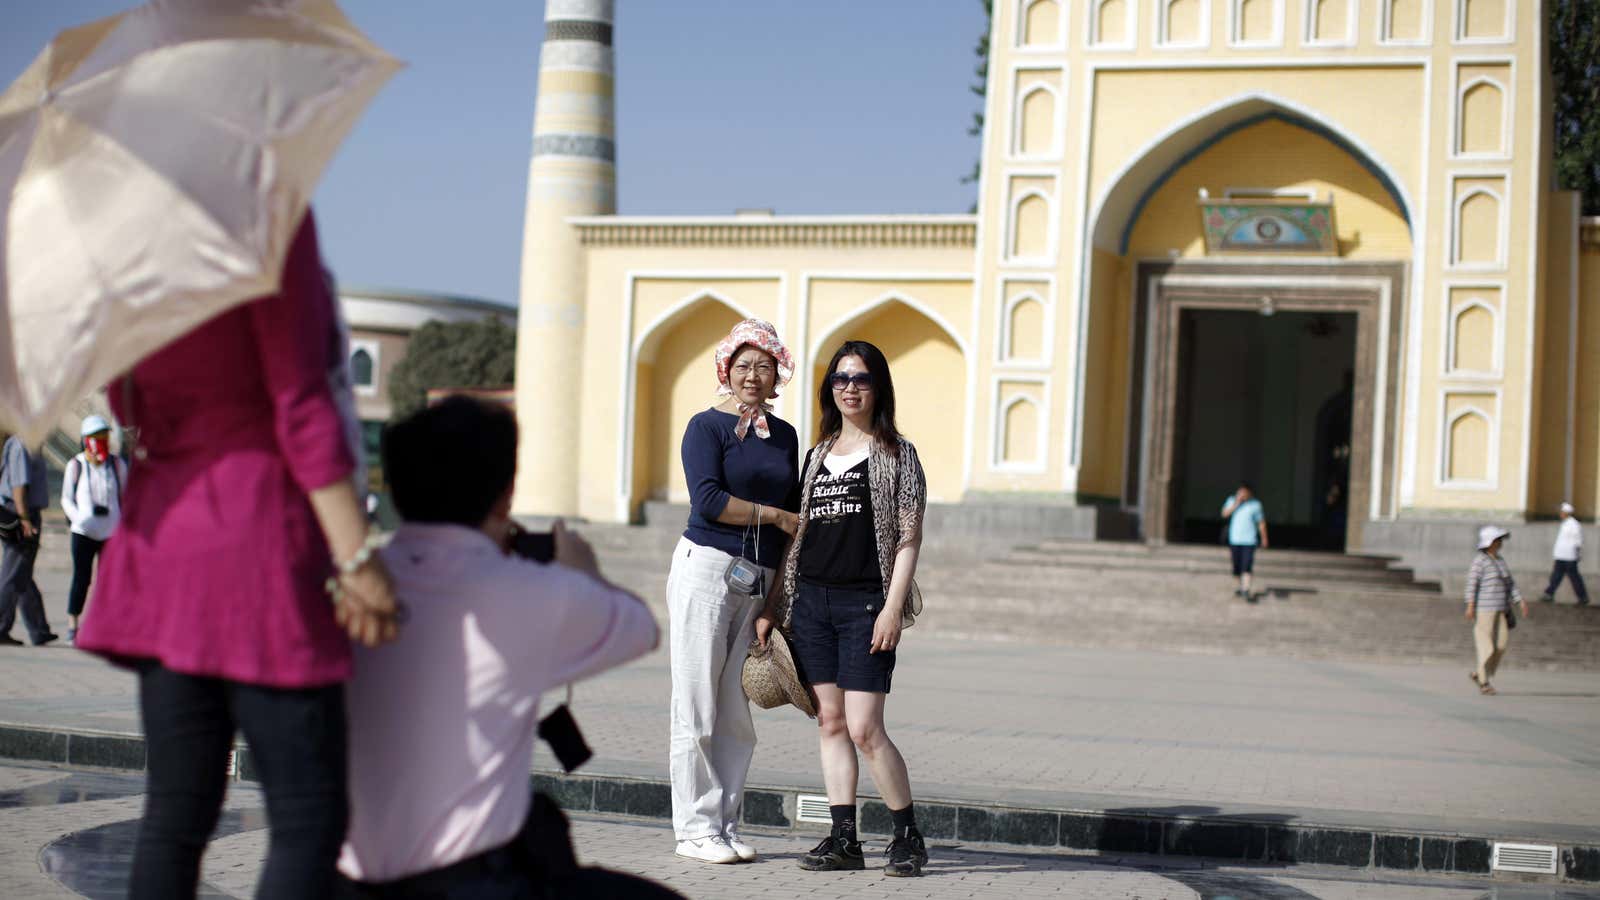 Chinese tourists pose for a picture in front of a mosque.